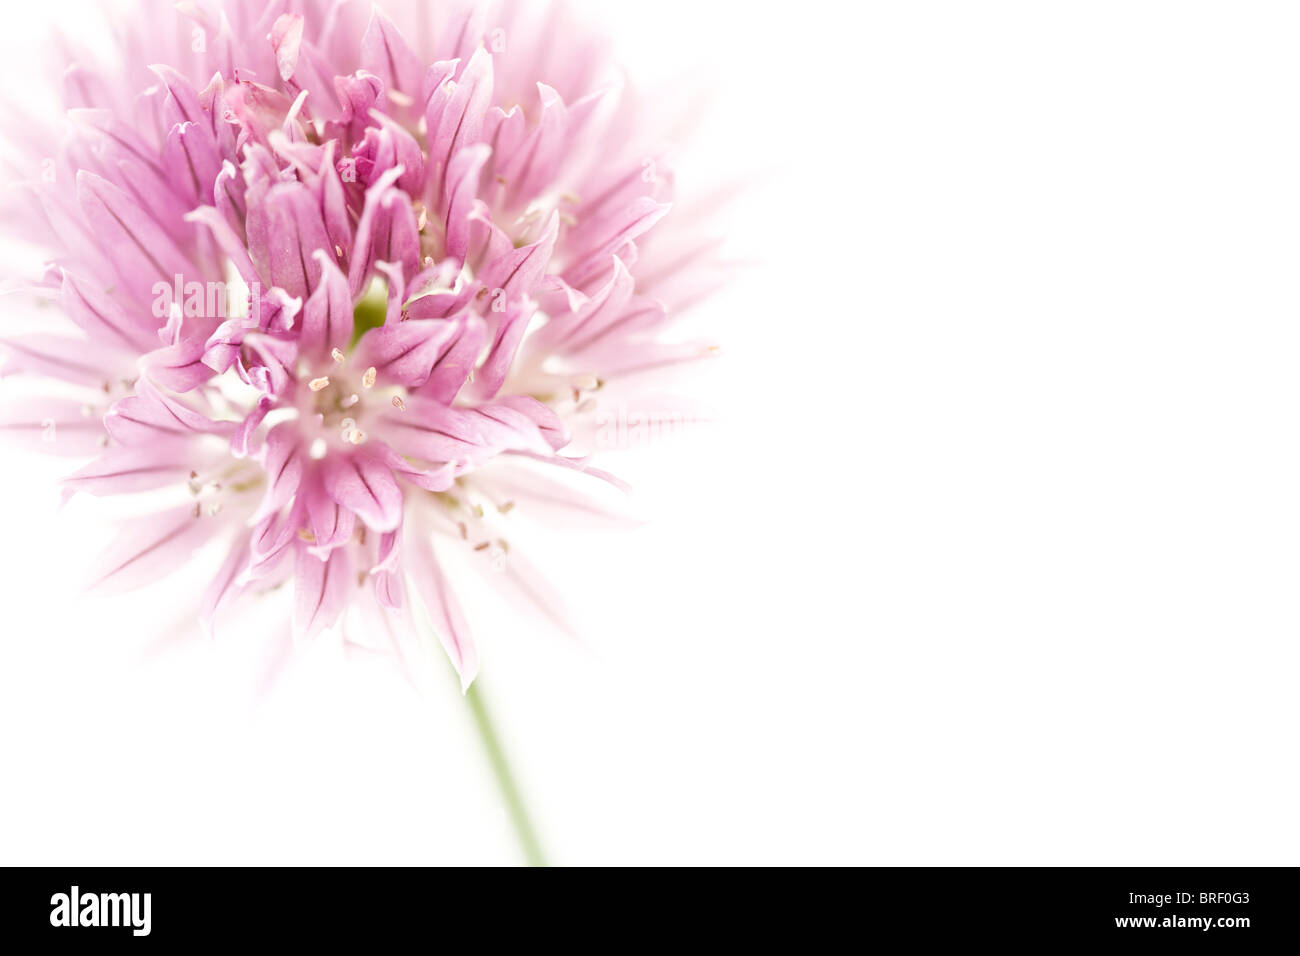 Chive flower isolated on white with copyspace to the right Stock Photo